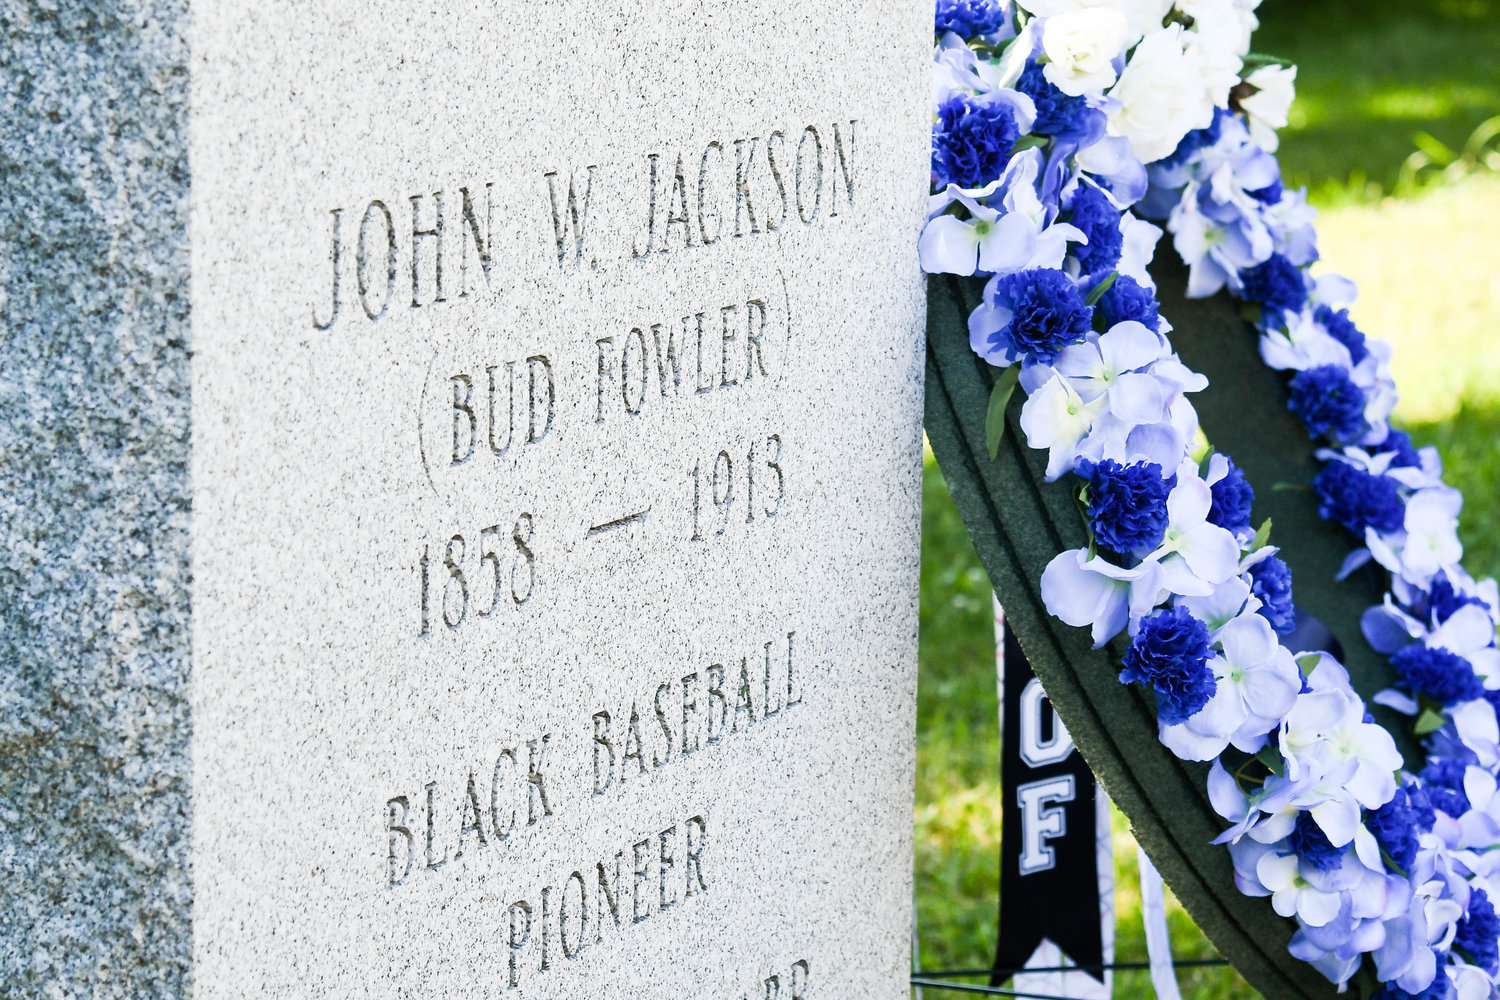 A ceremony honoring former baseball player Bud Fowler was conducted on Wednesday at Oakview Cemetery in Frankfort. Fowler is the earliest known African-American player in organized professional baseball.